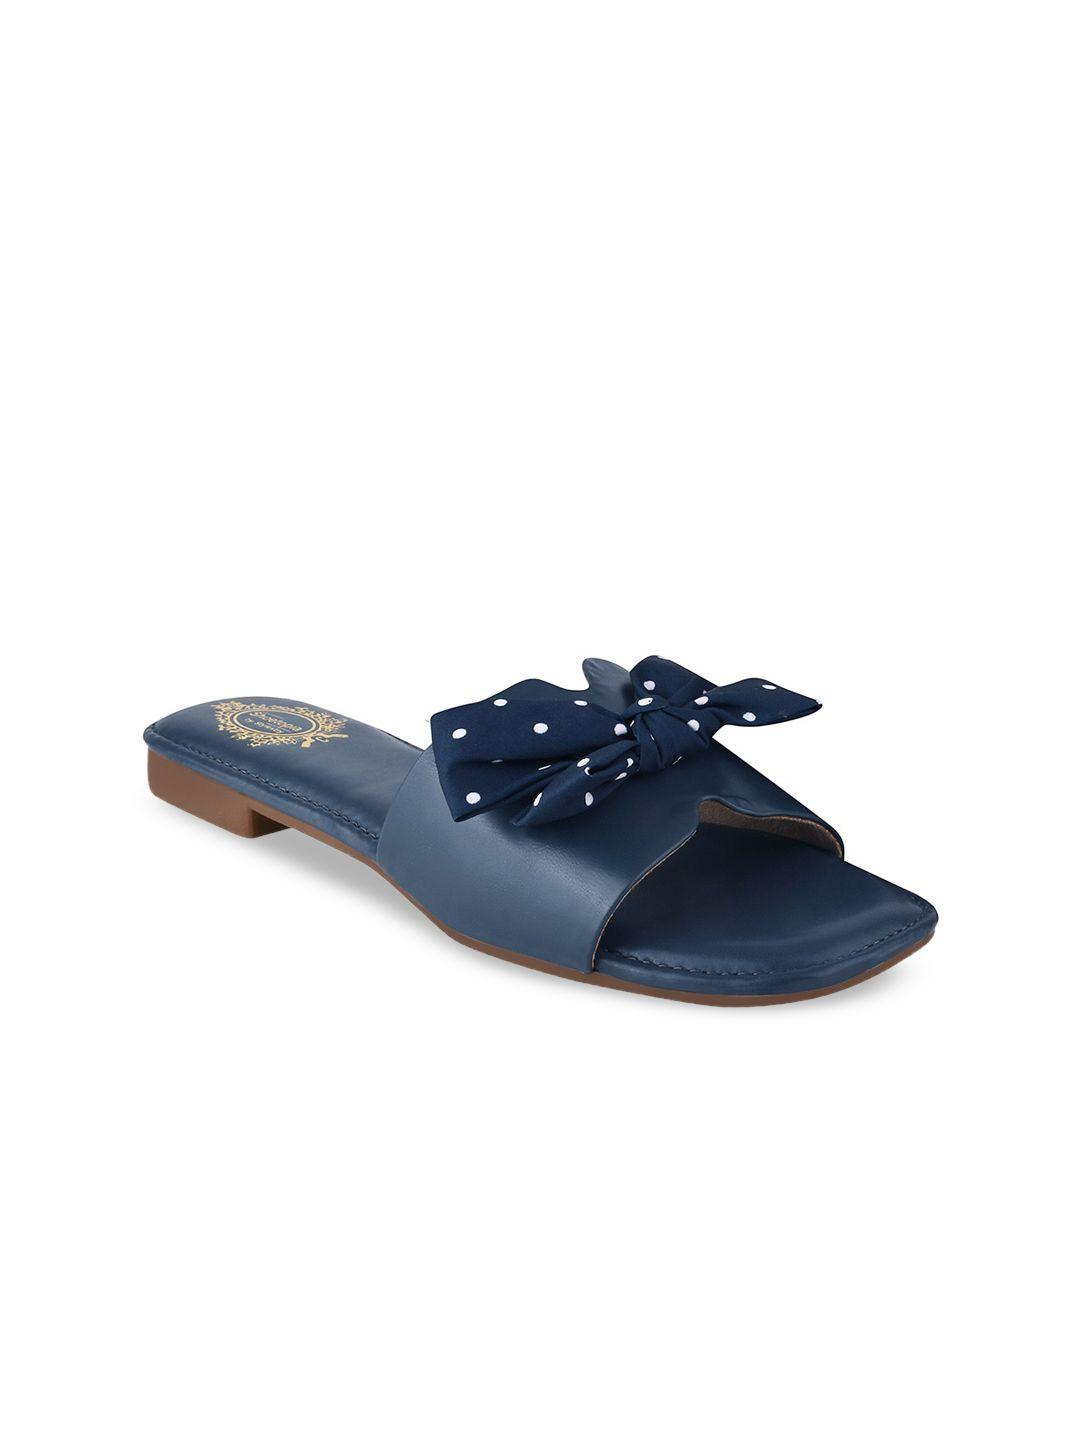 shoetopia open toe flats with bows